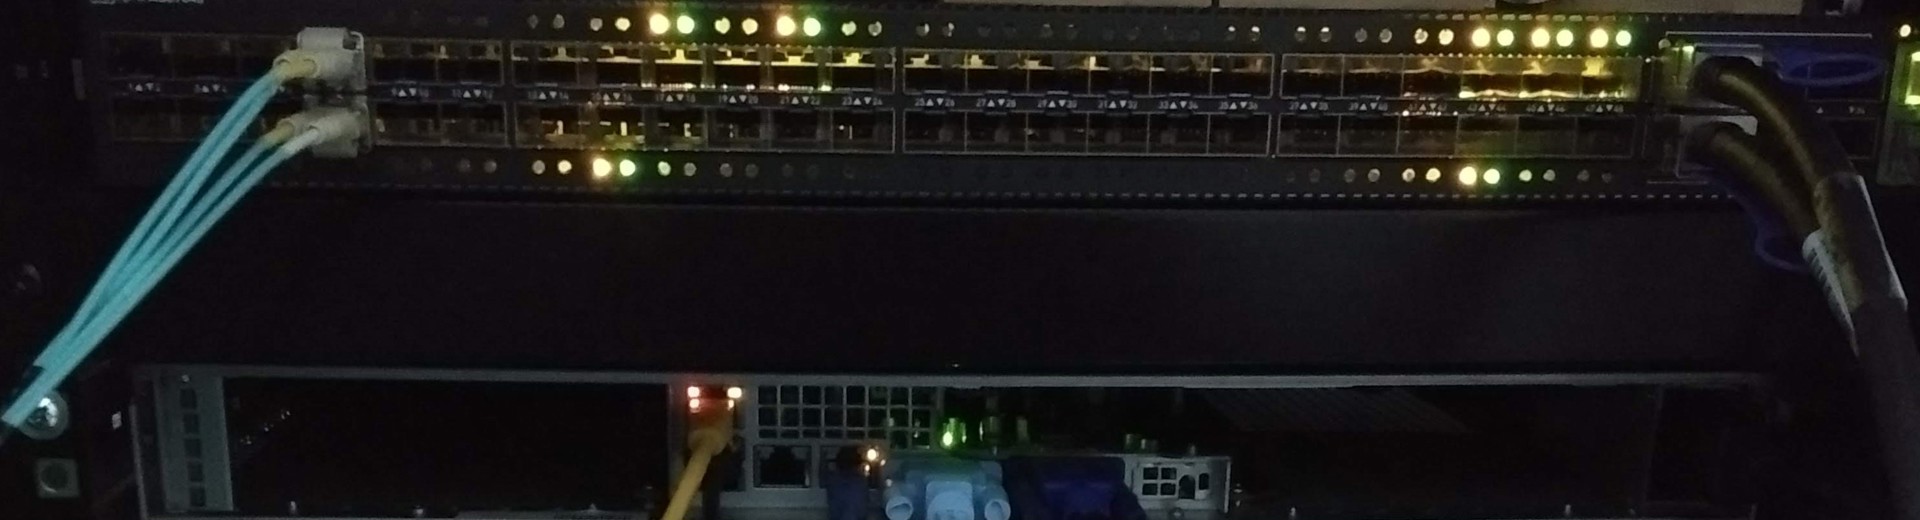 A switch board with lights and cables